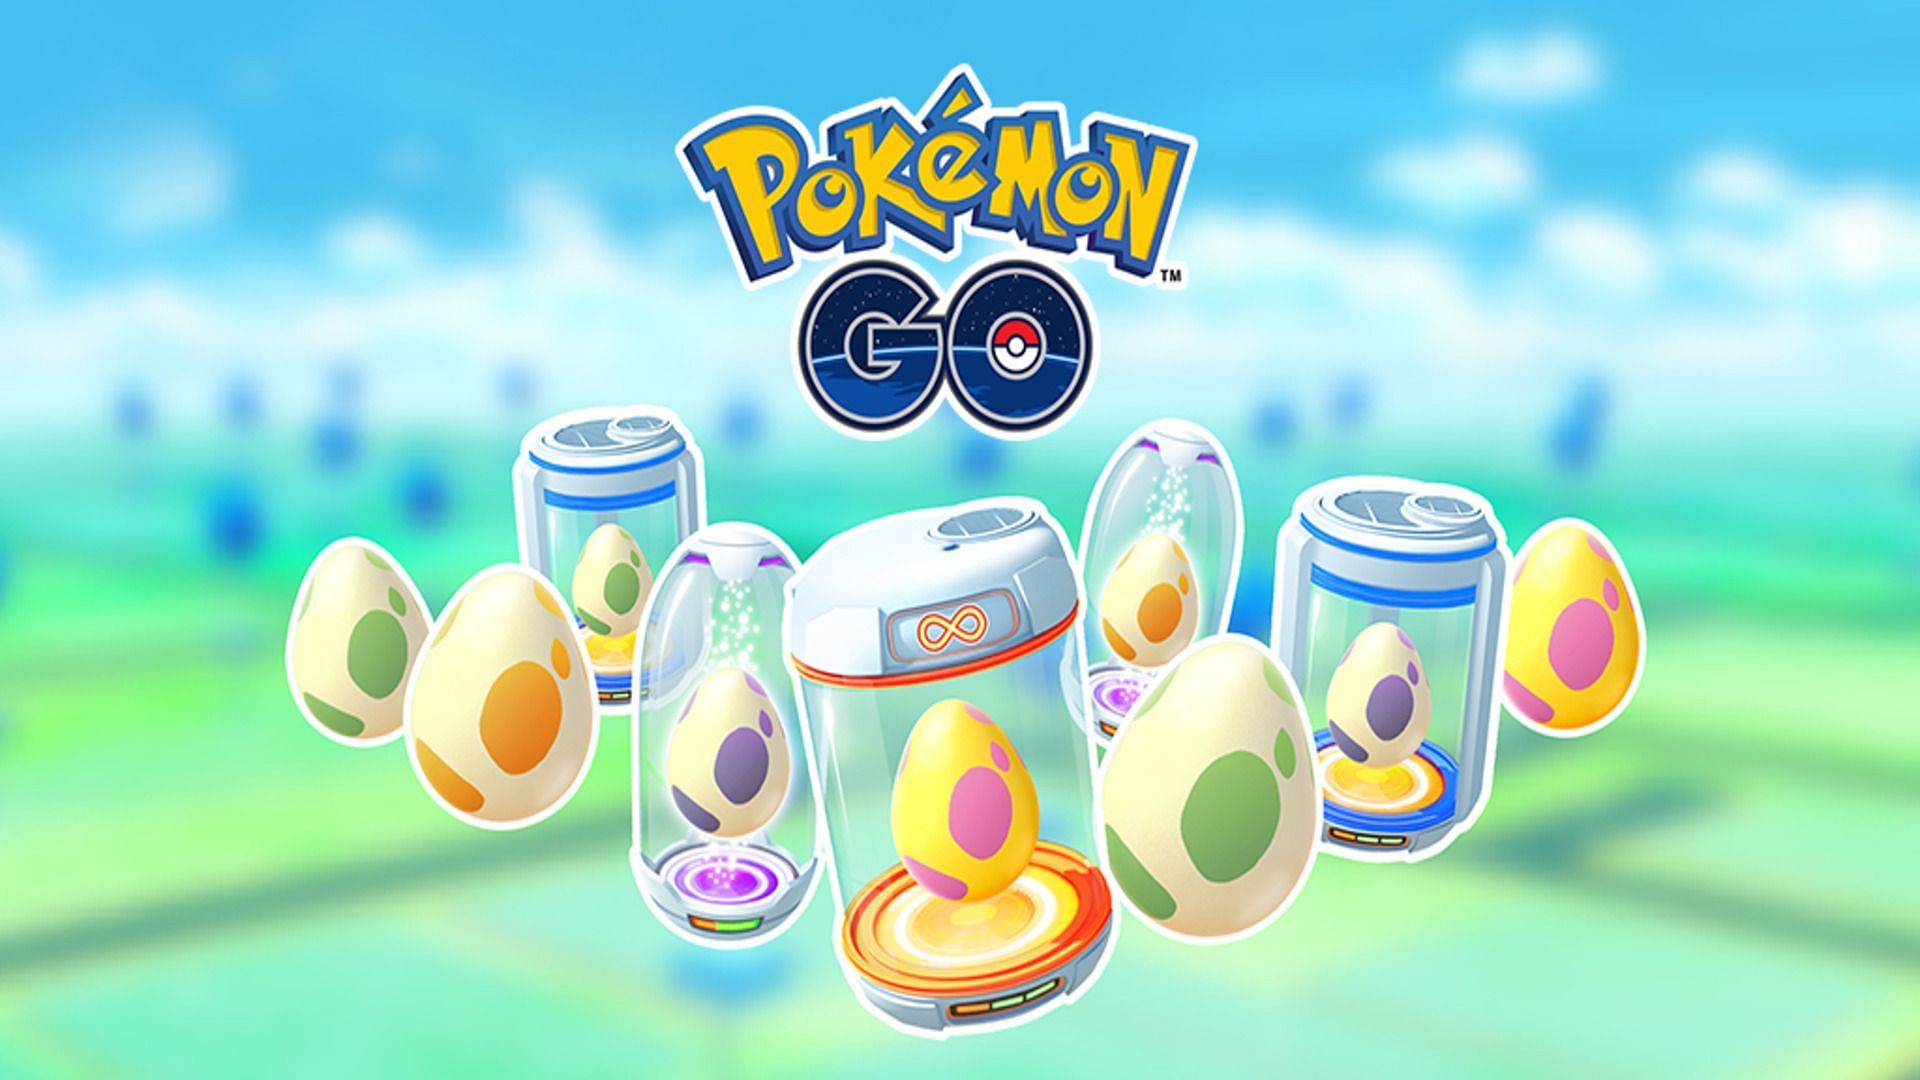 Official artwork for Pokemon GO displaying the different types of eggs in the game (Image via Niantic)